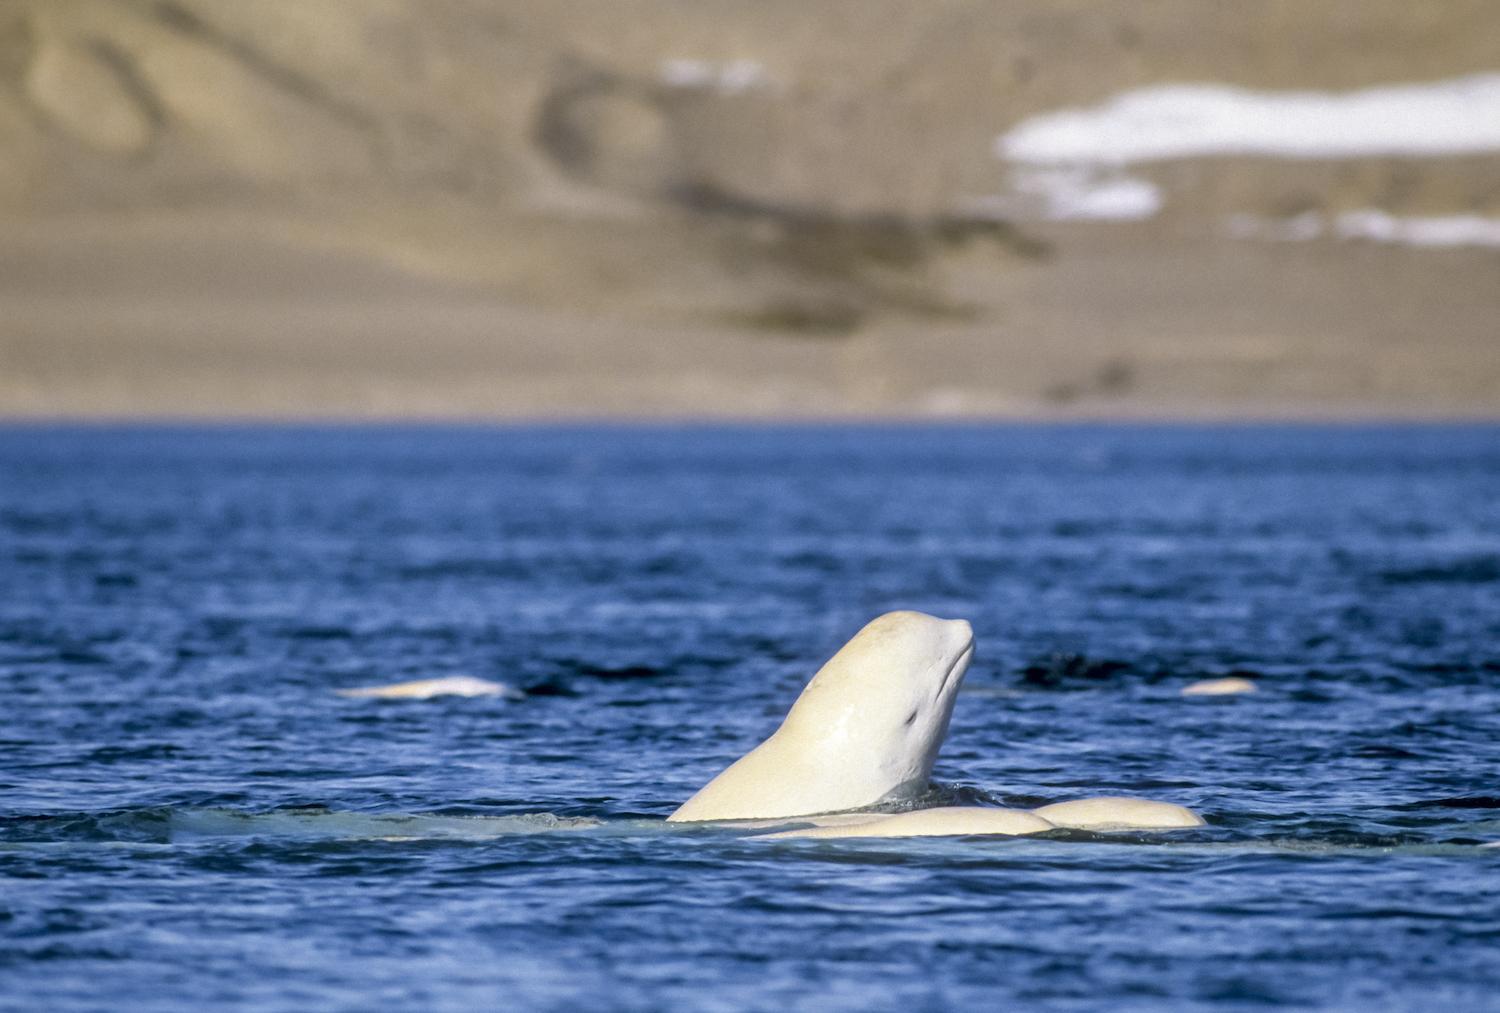 Boaters must stay at least 400 metres (1,312 feet) away from belugas in Saguenay-St. Lawrence Marine Park in Quebec/Parks Canada